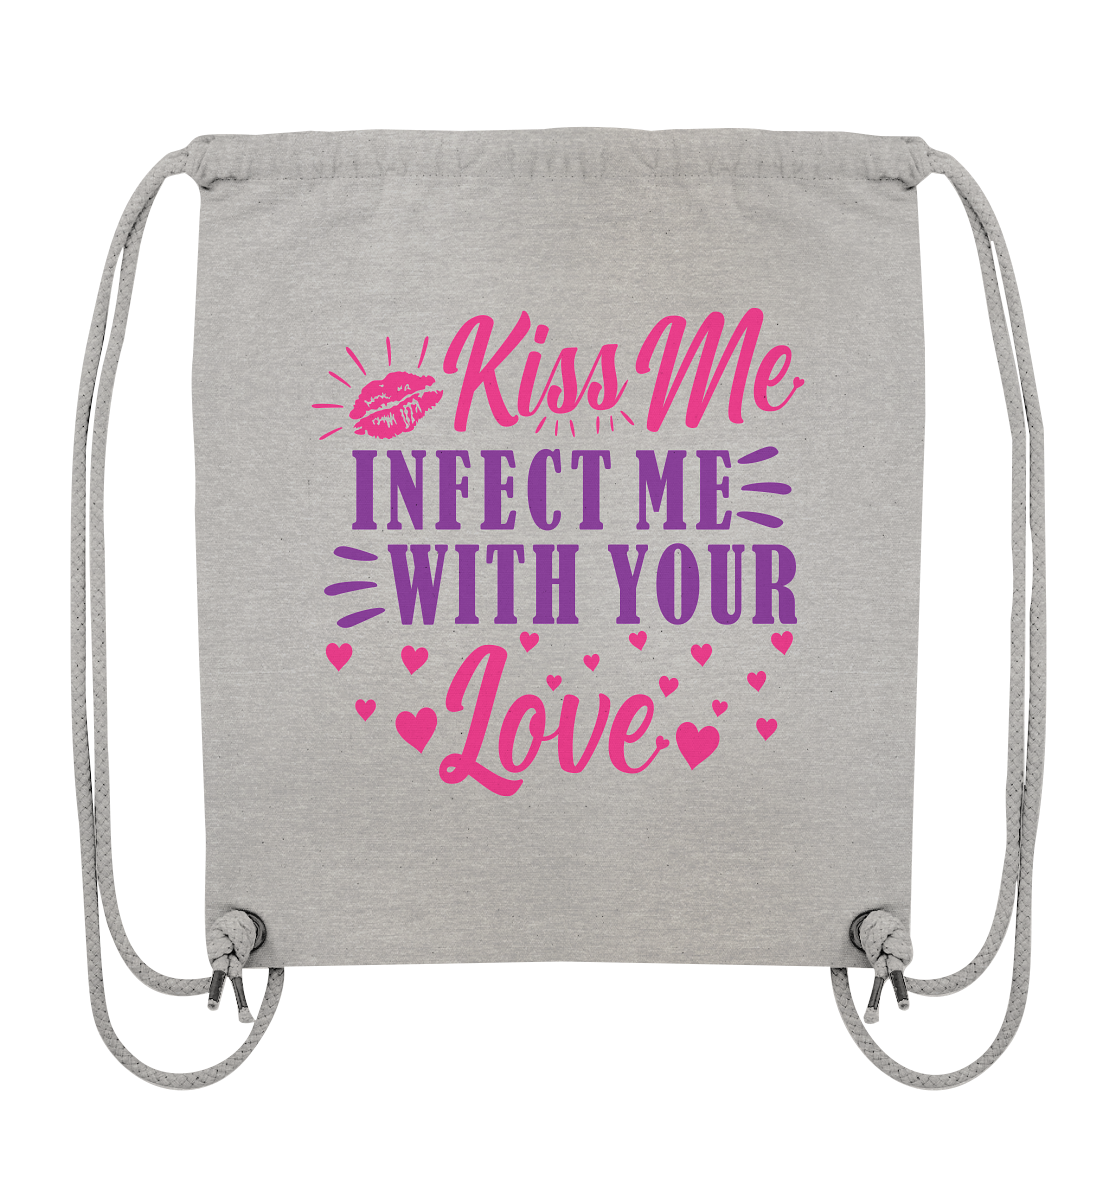 Kiss me infect me with your love - Organic Gym-Bag